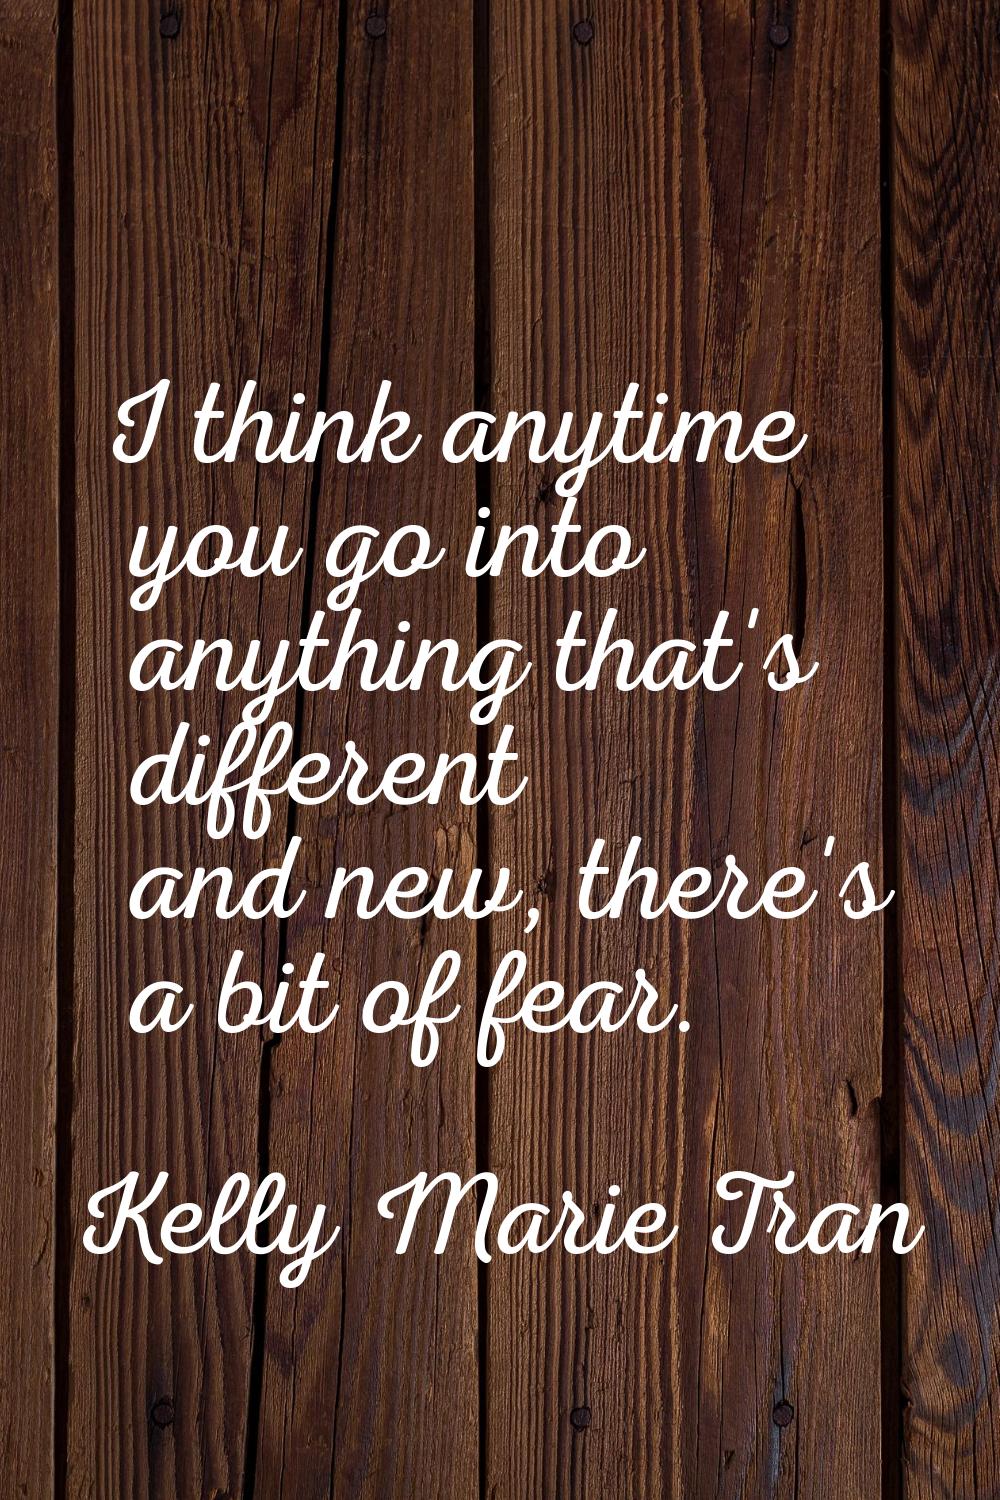 I think anytime you go into anything that's different and new, there's a bit of fear.